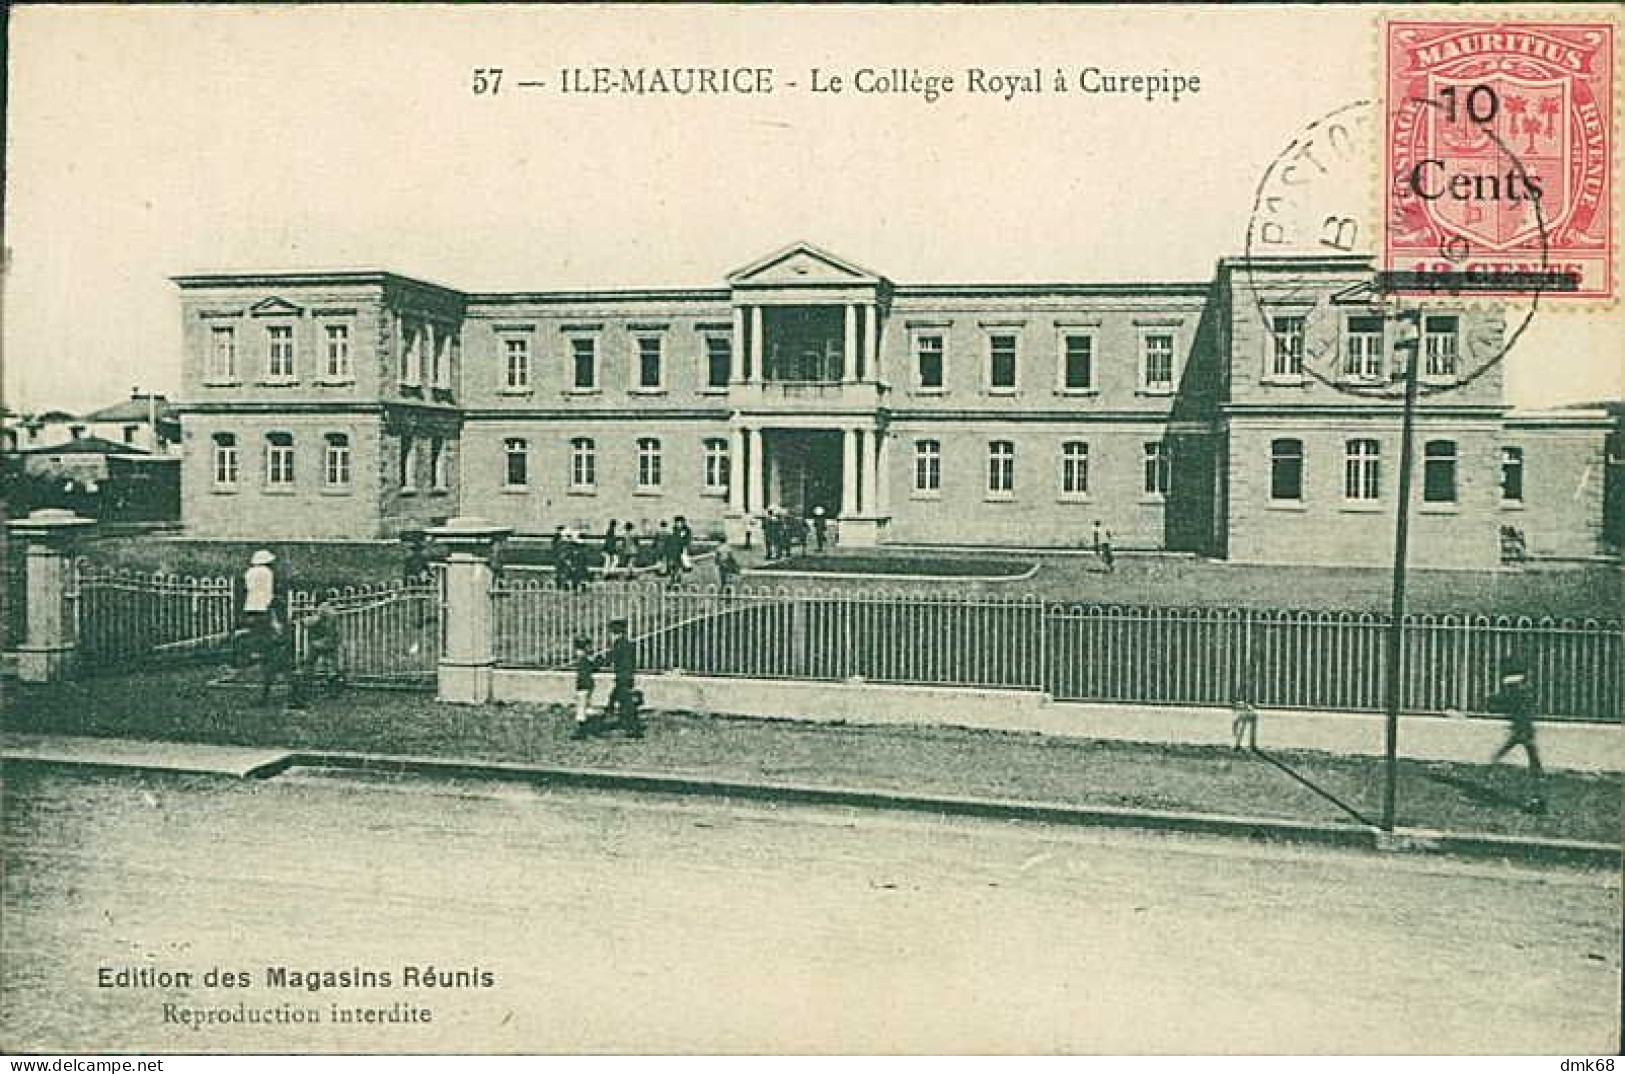 MAURITIUS / ILE MAURICE - LE COLLEGE ROYAL A CUREPIPE - EDIT. MAGASINS REUNIS - MAILED 1926 / OVERPRINT STAMP (12577) - Maurice